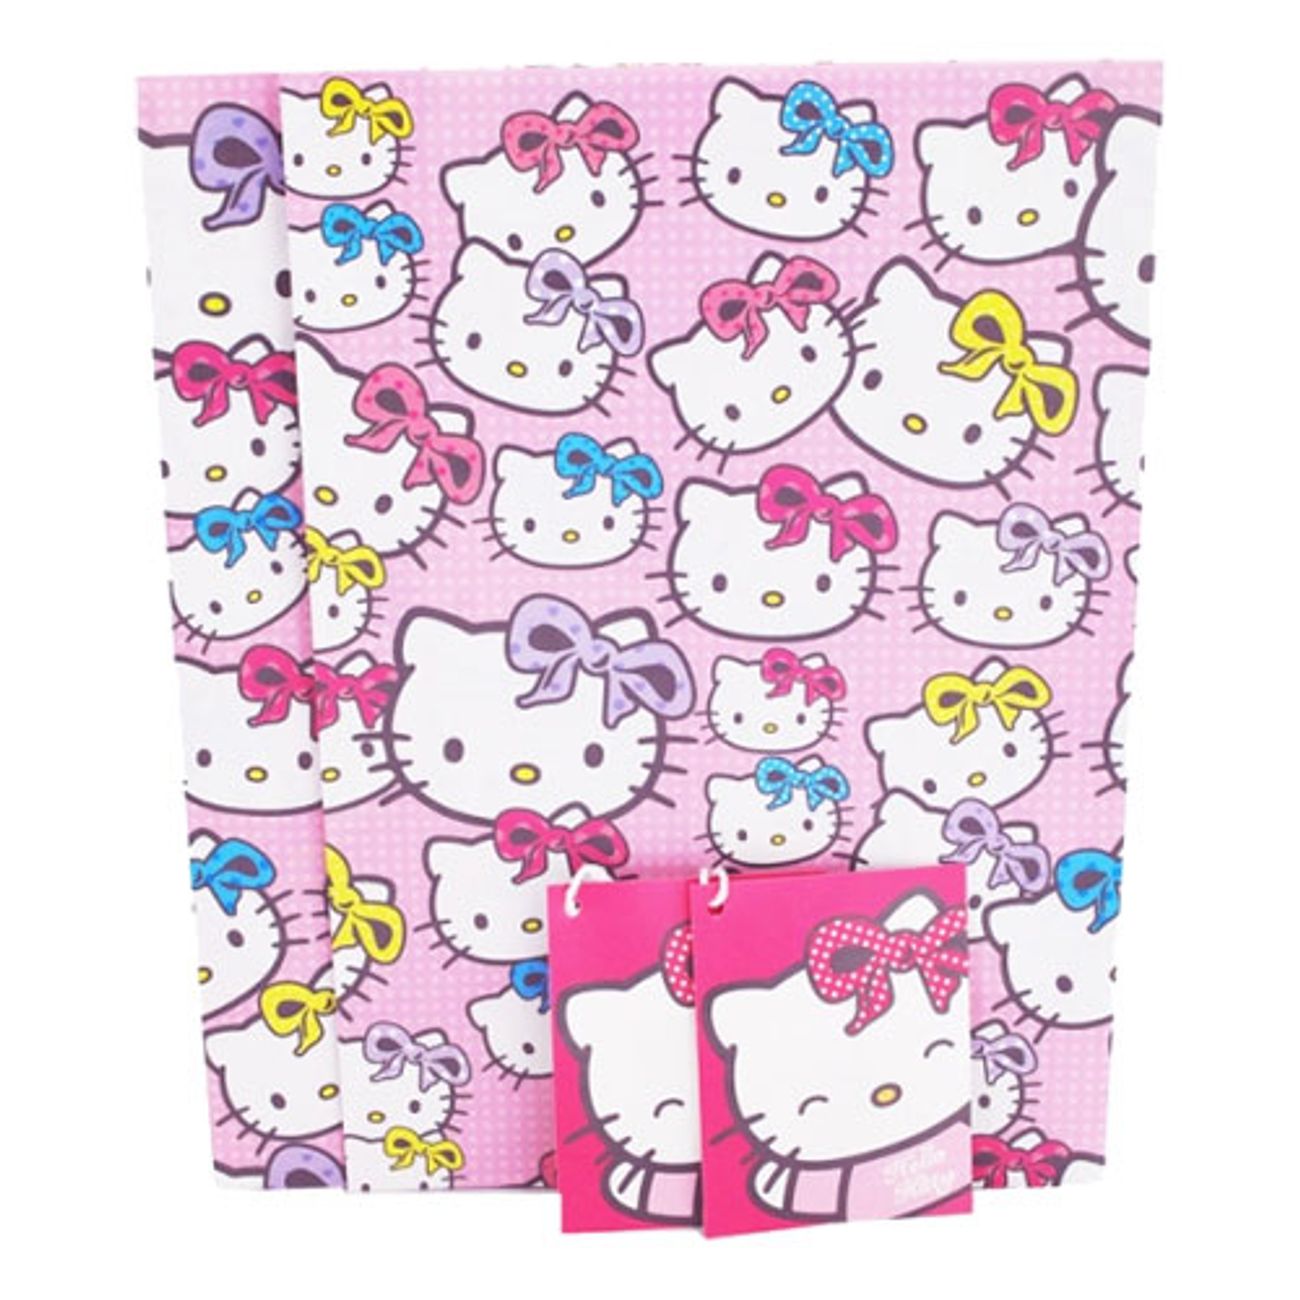 hello-kitty-inslagspapper-1